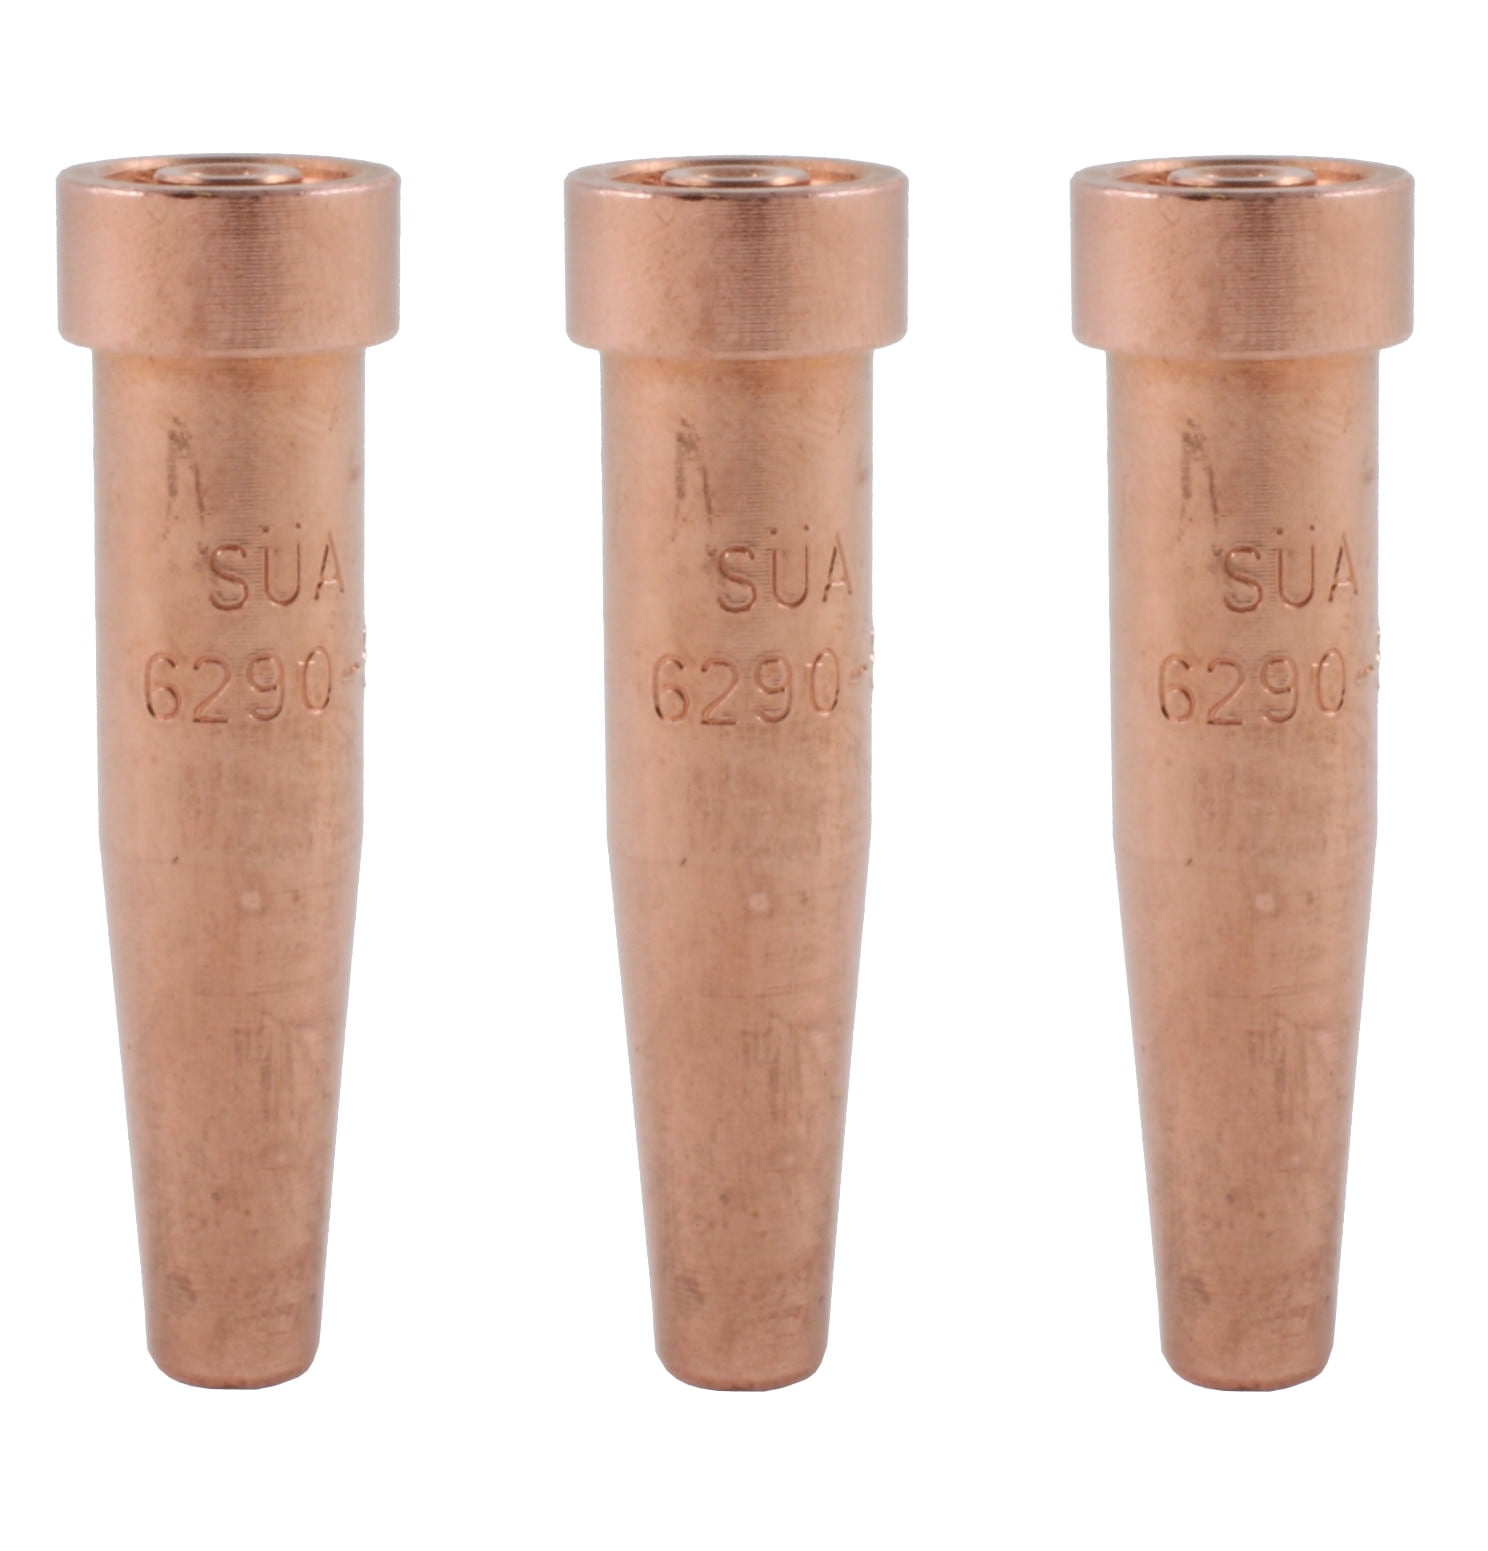 Compatible with Harris #4 3 PACK 6290-4 Acetylene Cutting Tip SÜA 